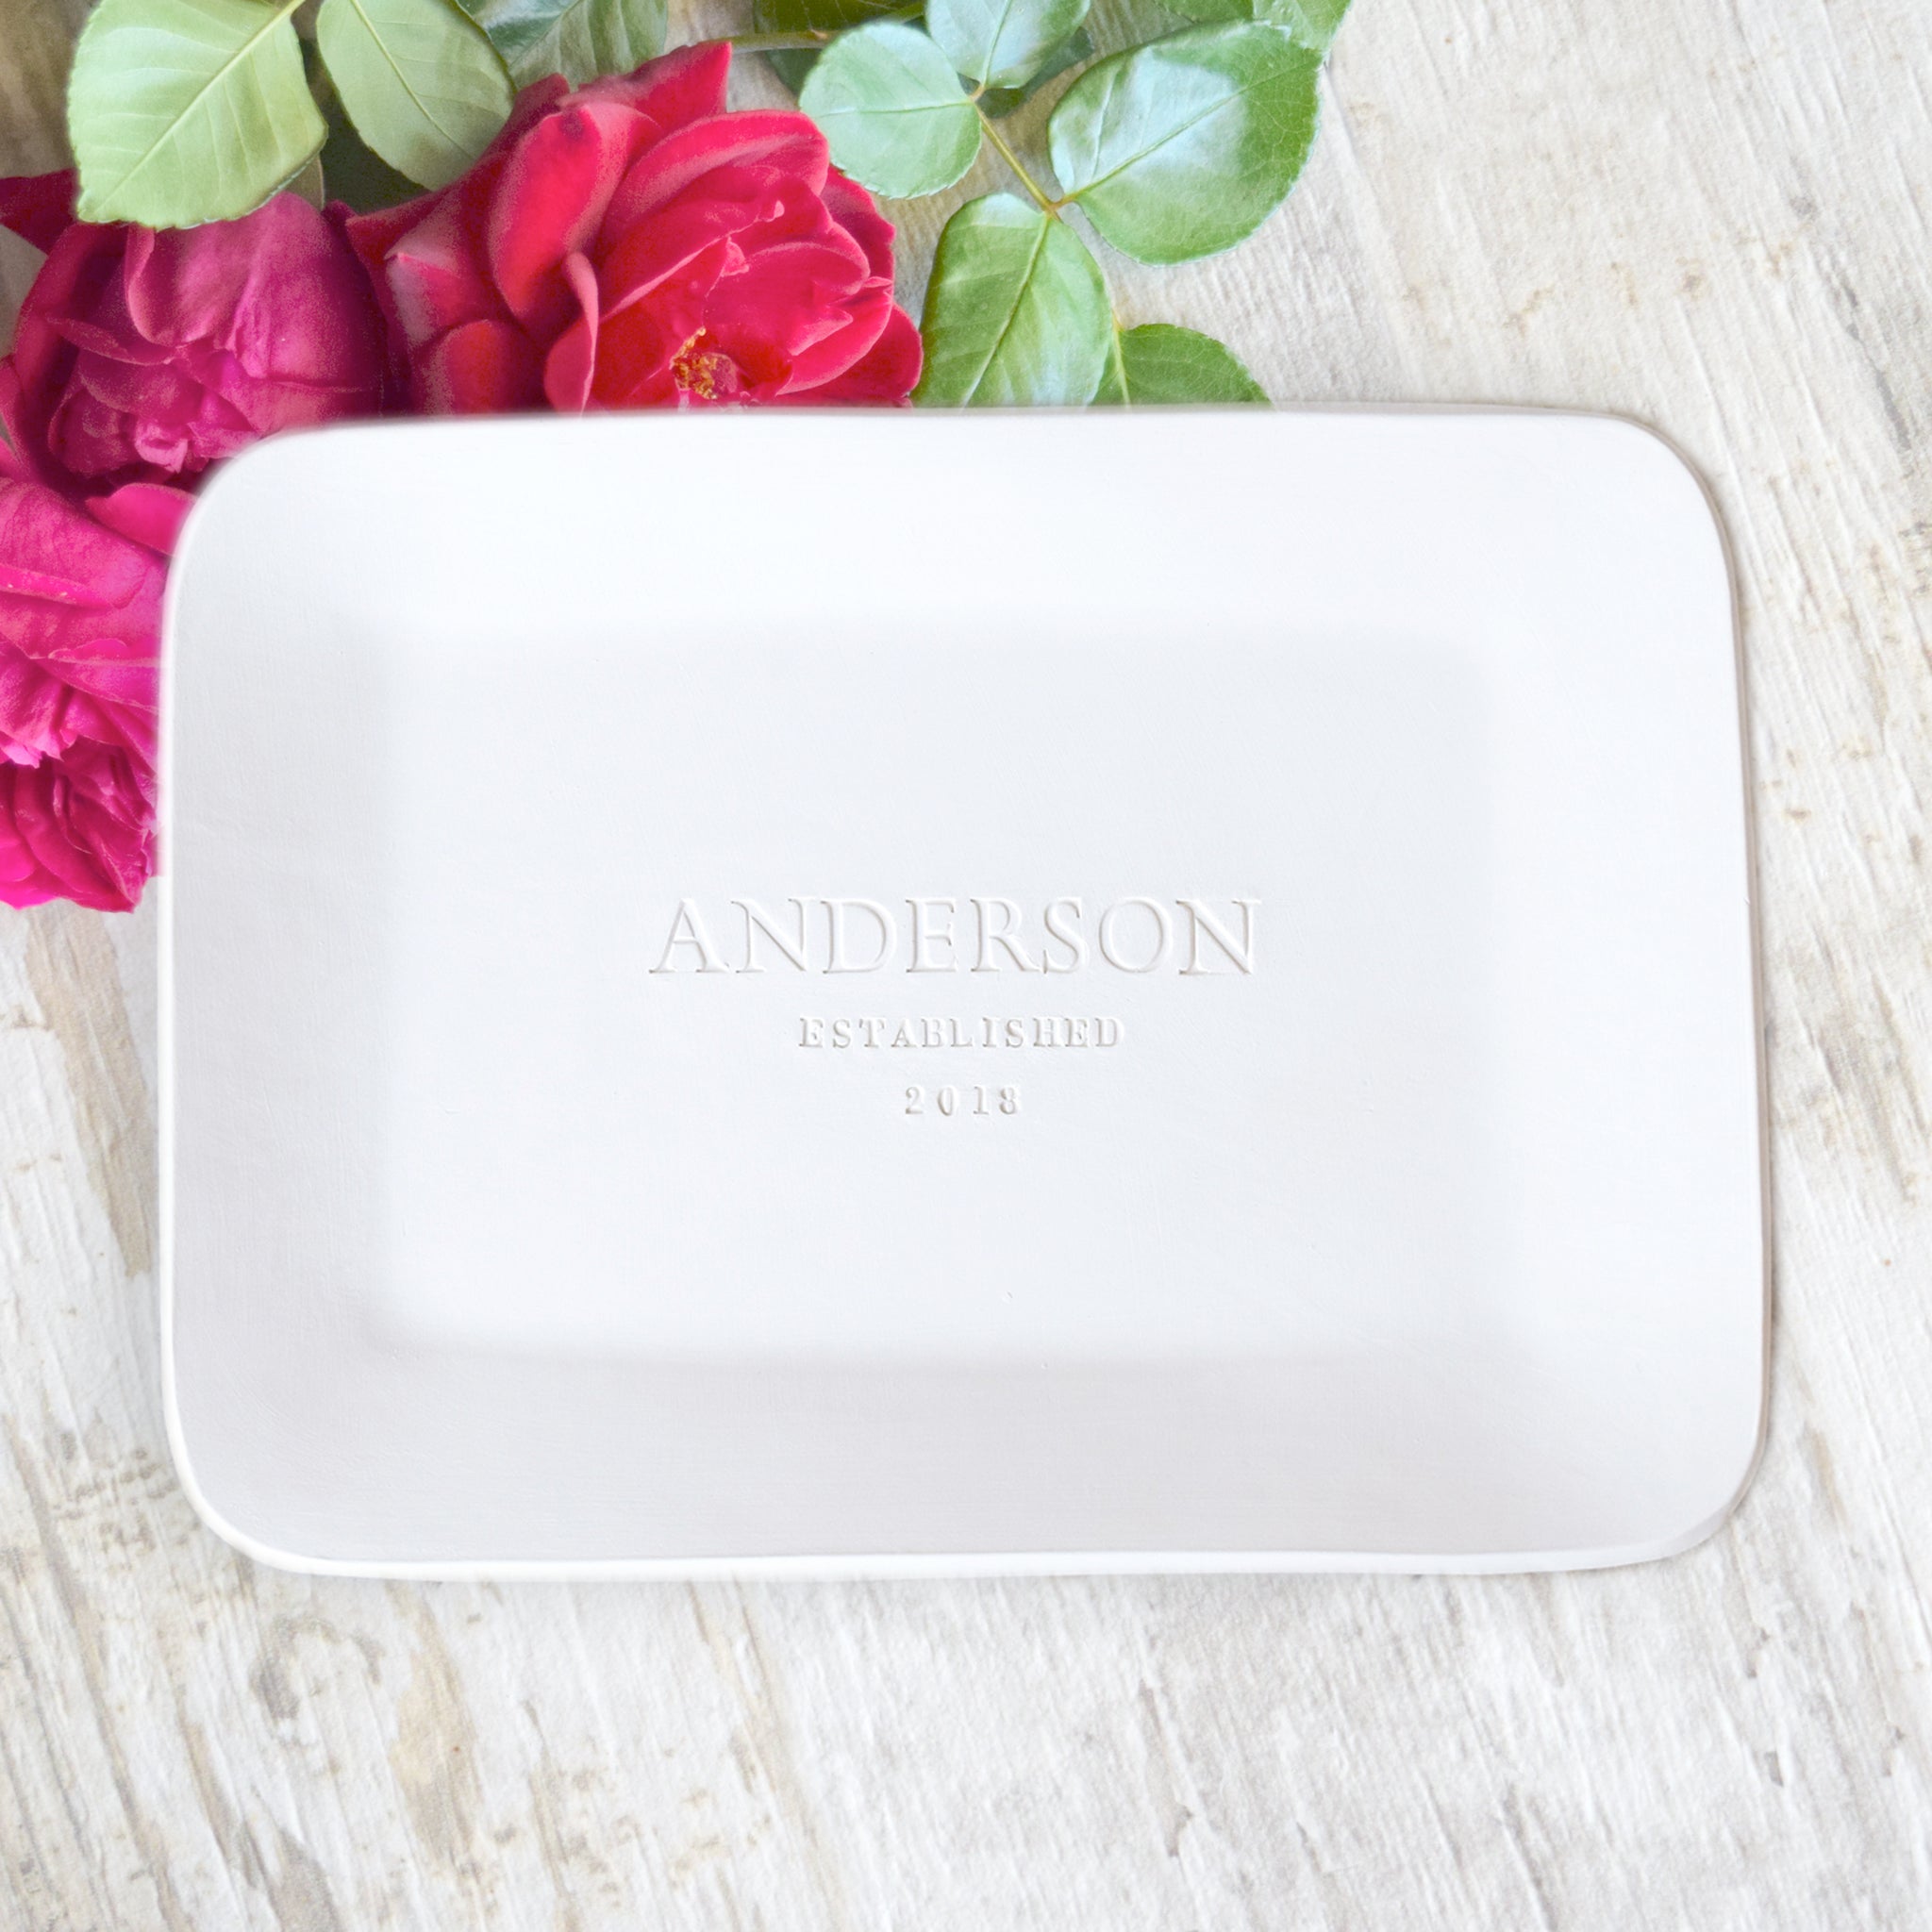 Personalized Serving Tray, Custom Serving Tray With Golden Handle